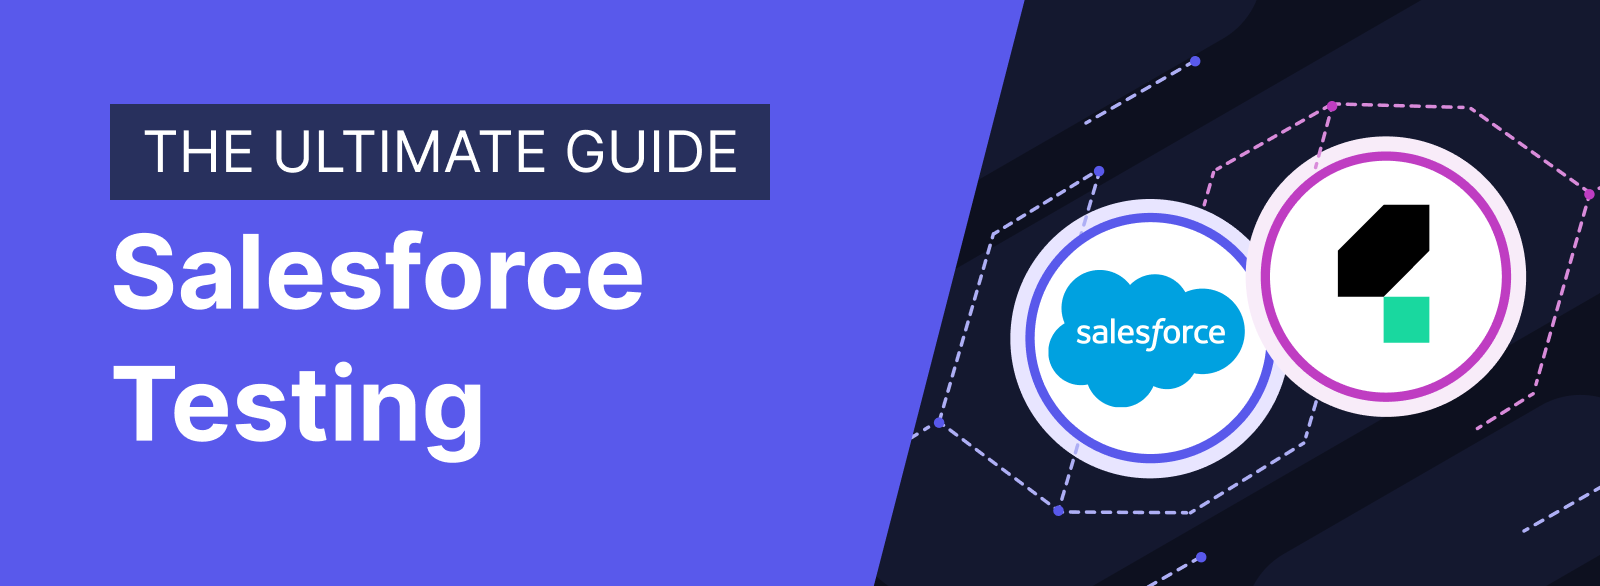 The Ultimate Guide Salesforce Testing banner.png